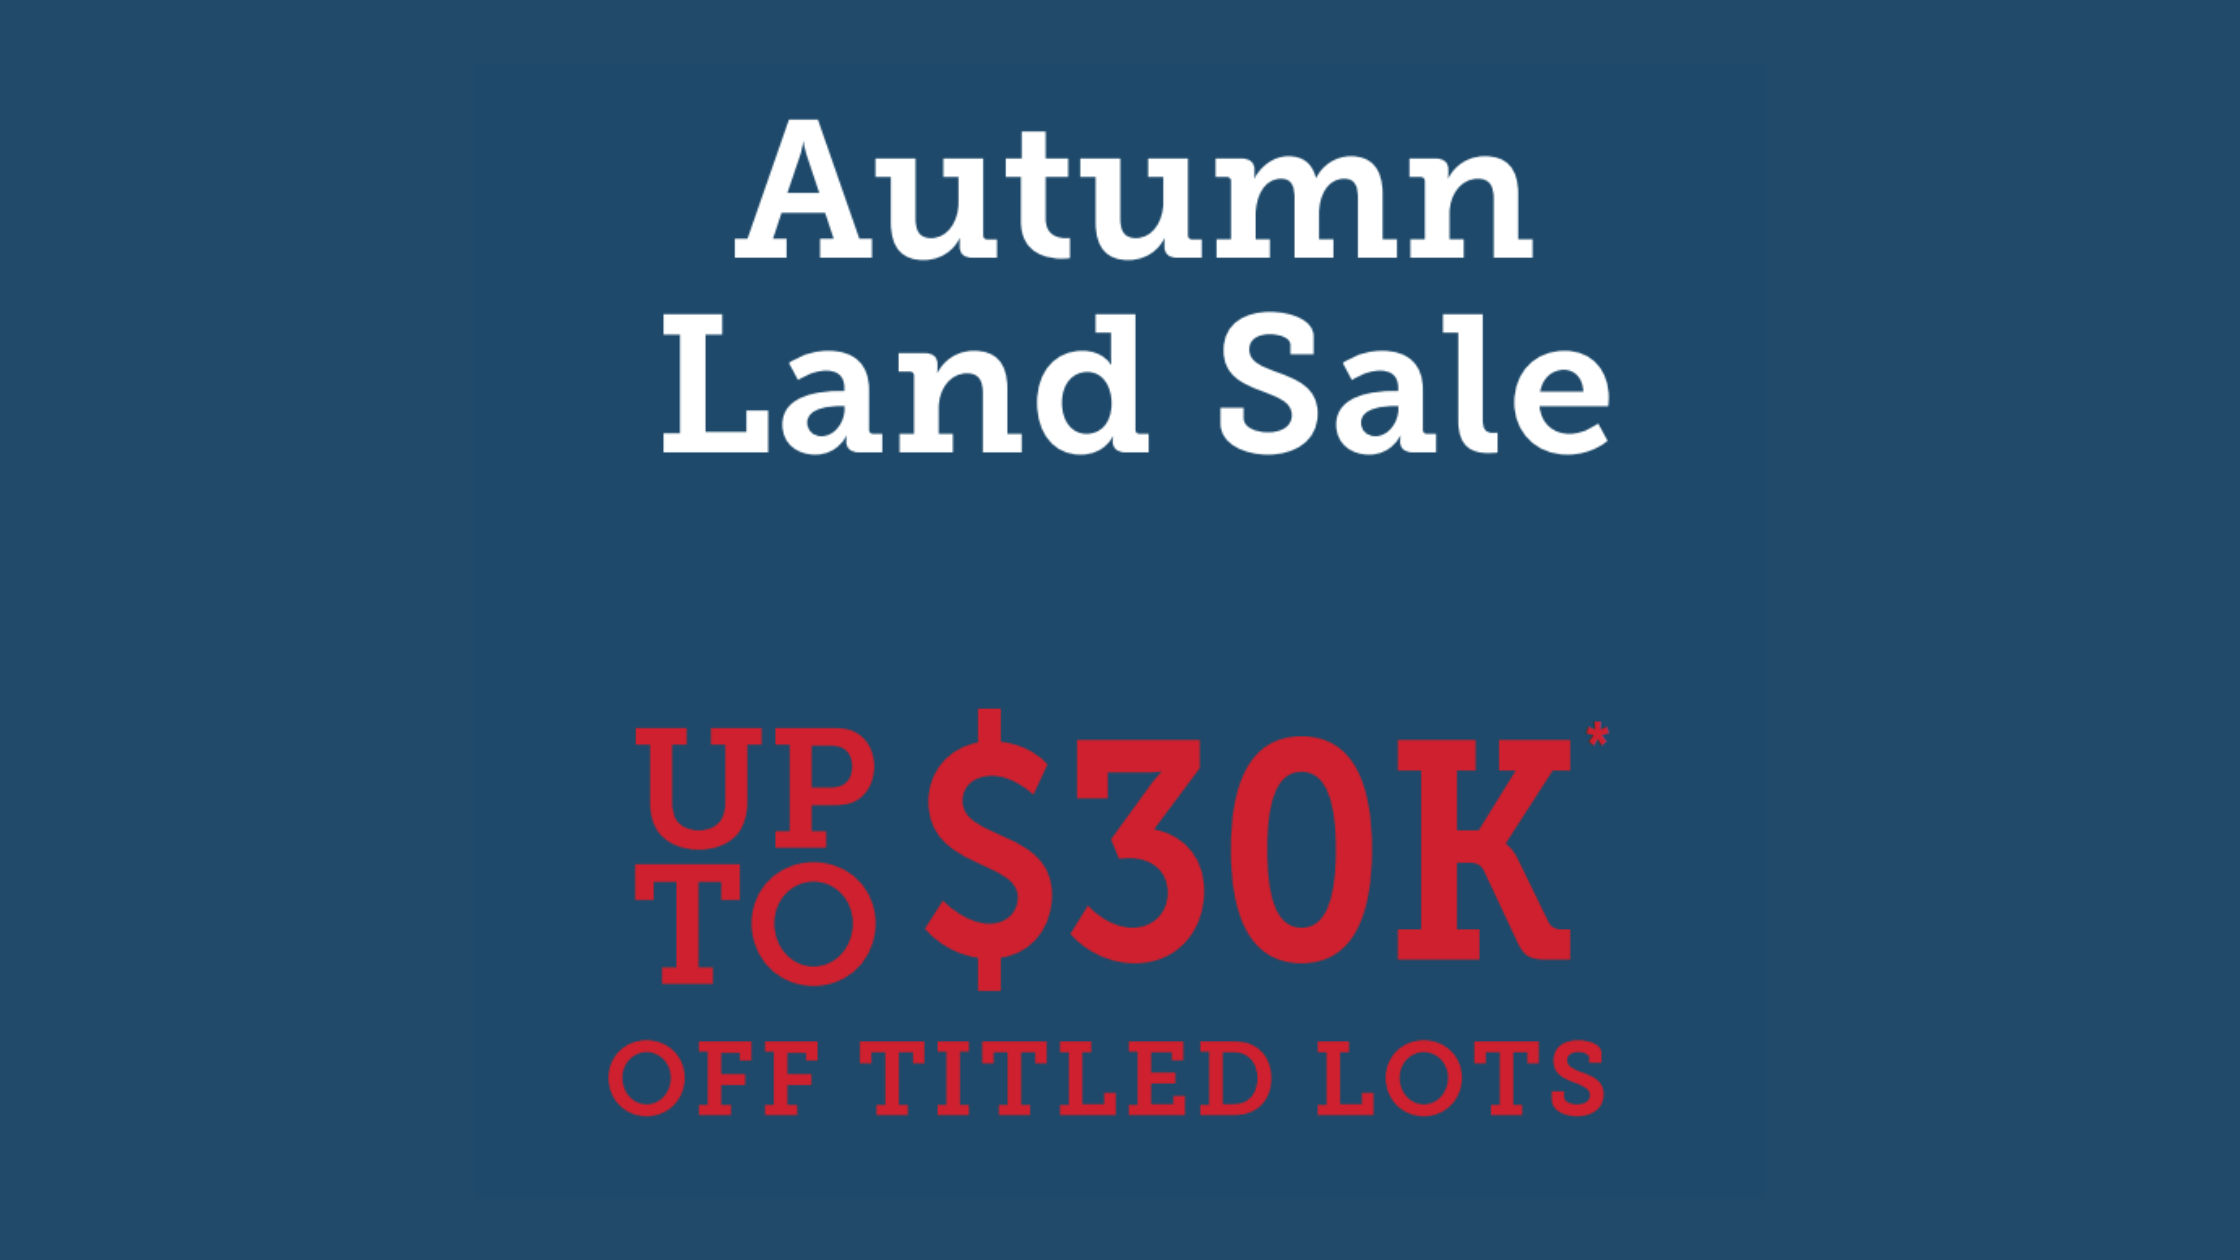 Up to $30K Off Titled Lots